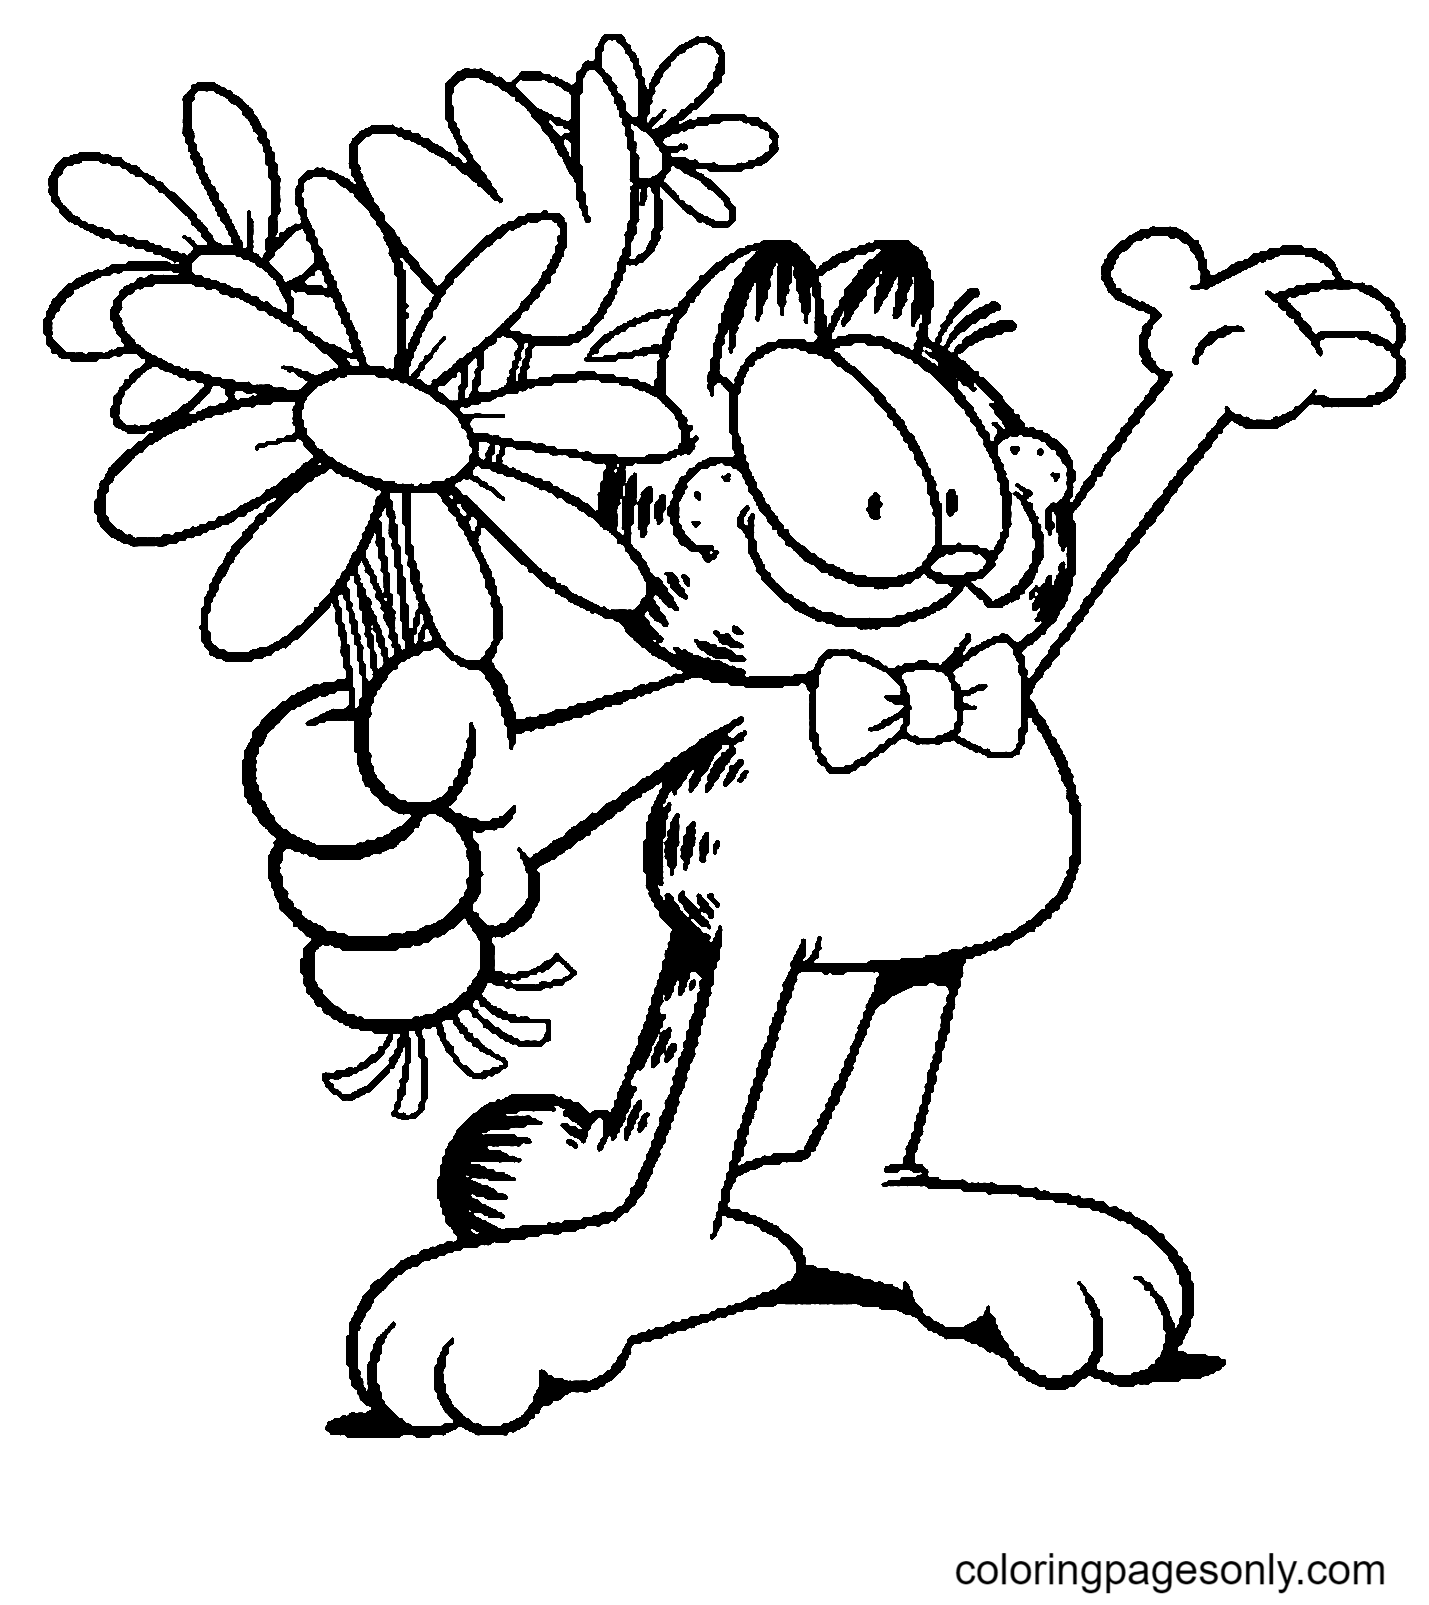 Garfield with Flowers Coloring Pages